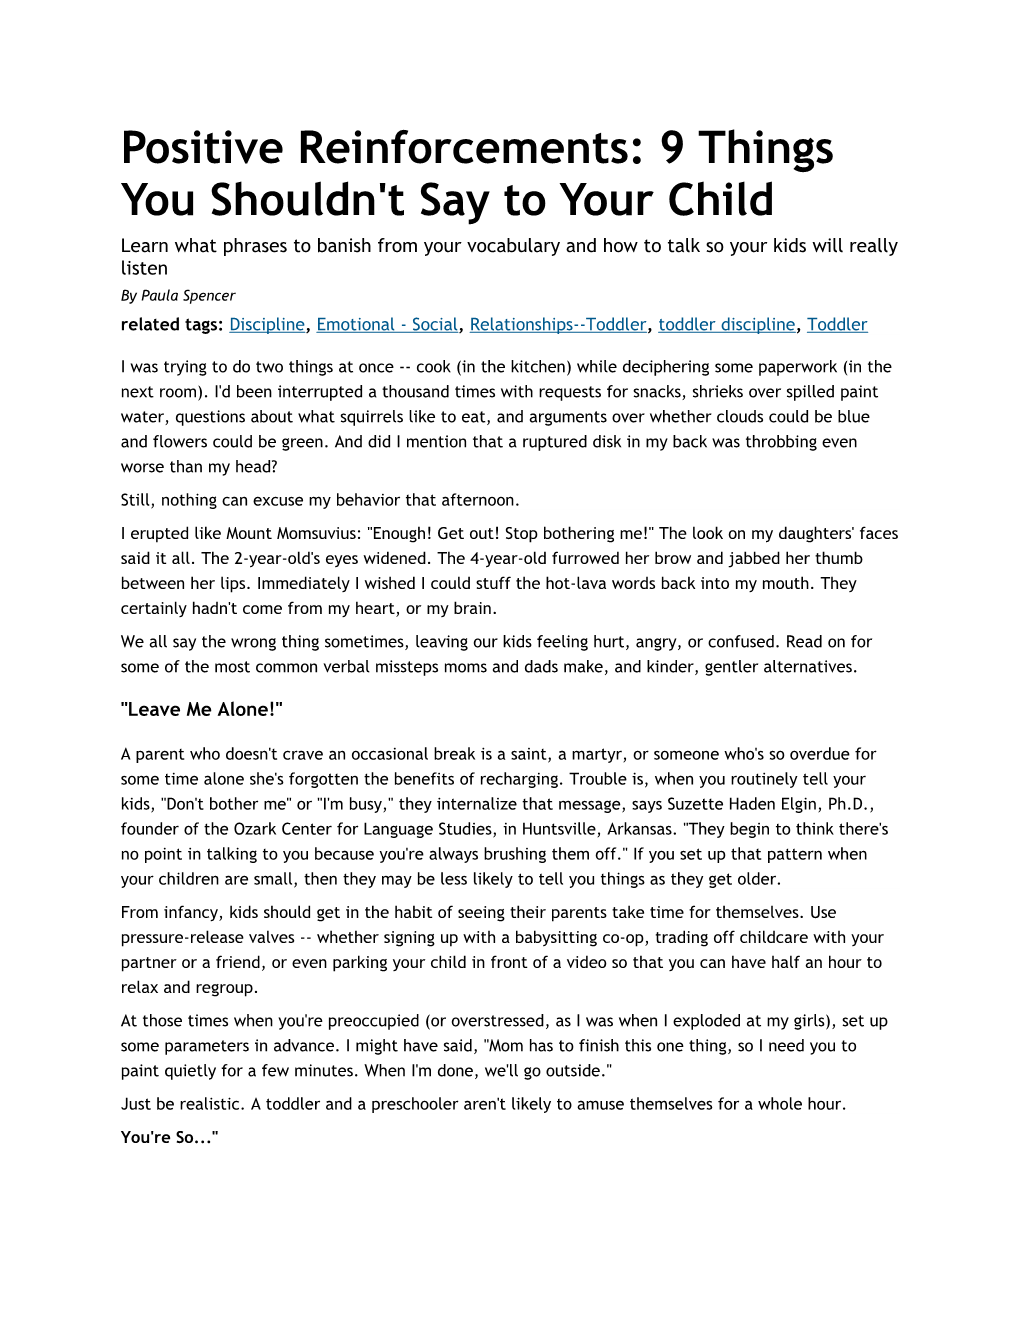 Positive Reinforcements: 9 Things You Shouldn't Say to Your Child